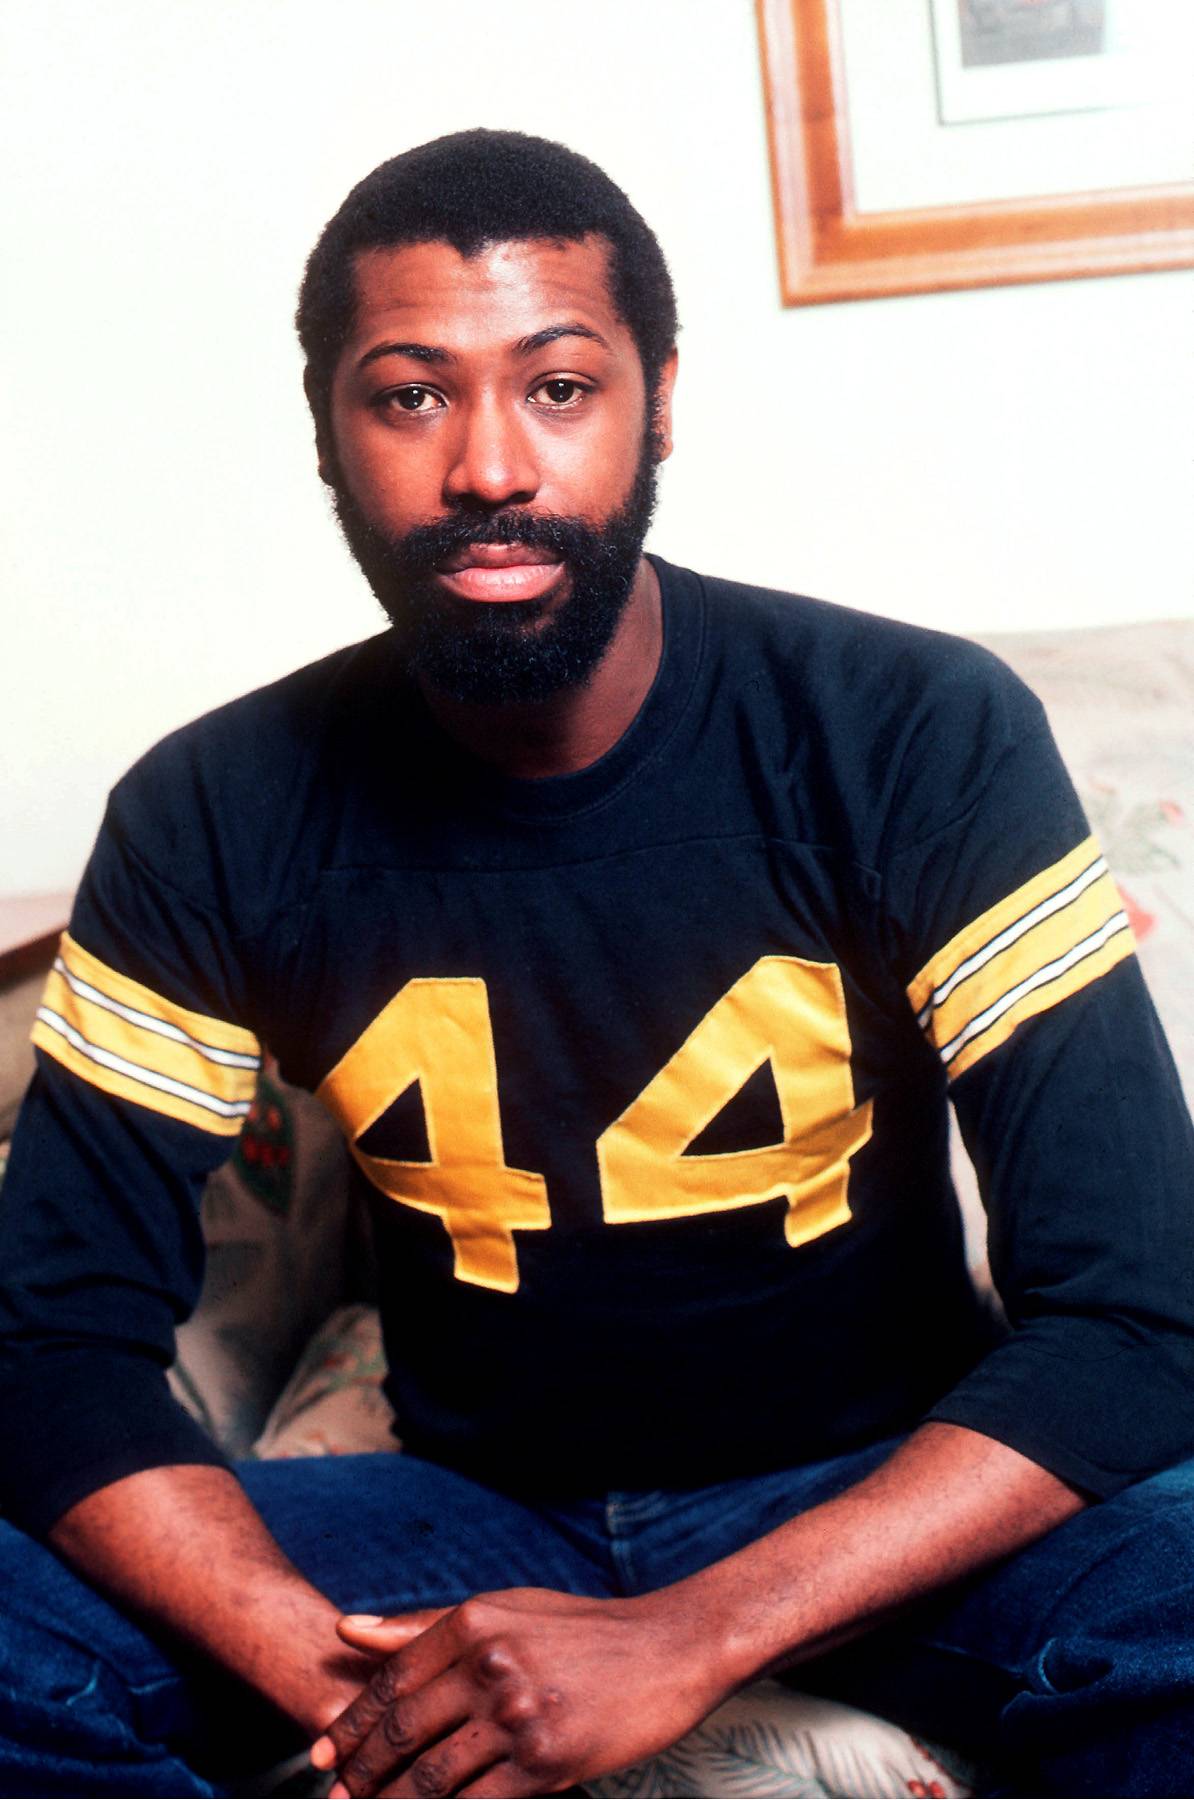 A Star is Born - Theodore DeReese &quot;Teddy&quot; Pendergrass, Sr. was born March 26, 1950 in Philadelphia, PA. He'd also become affectionately known as Teddy P, TP or Teddy Bear throughout the course of his career. (Photo: Michael Putland/Getty Images)